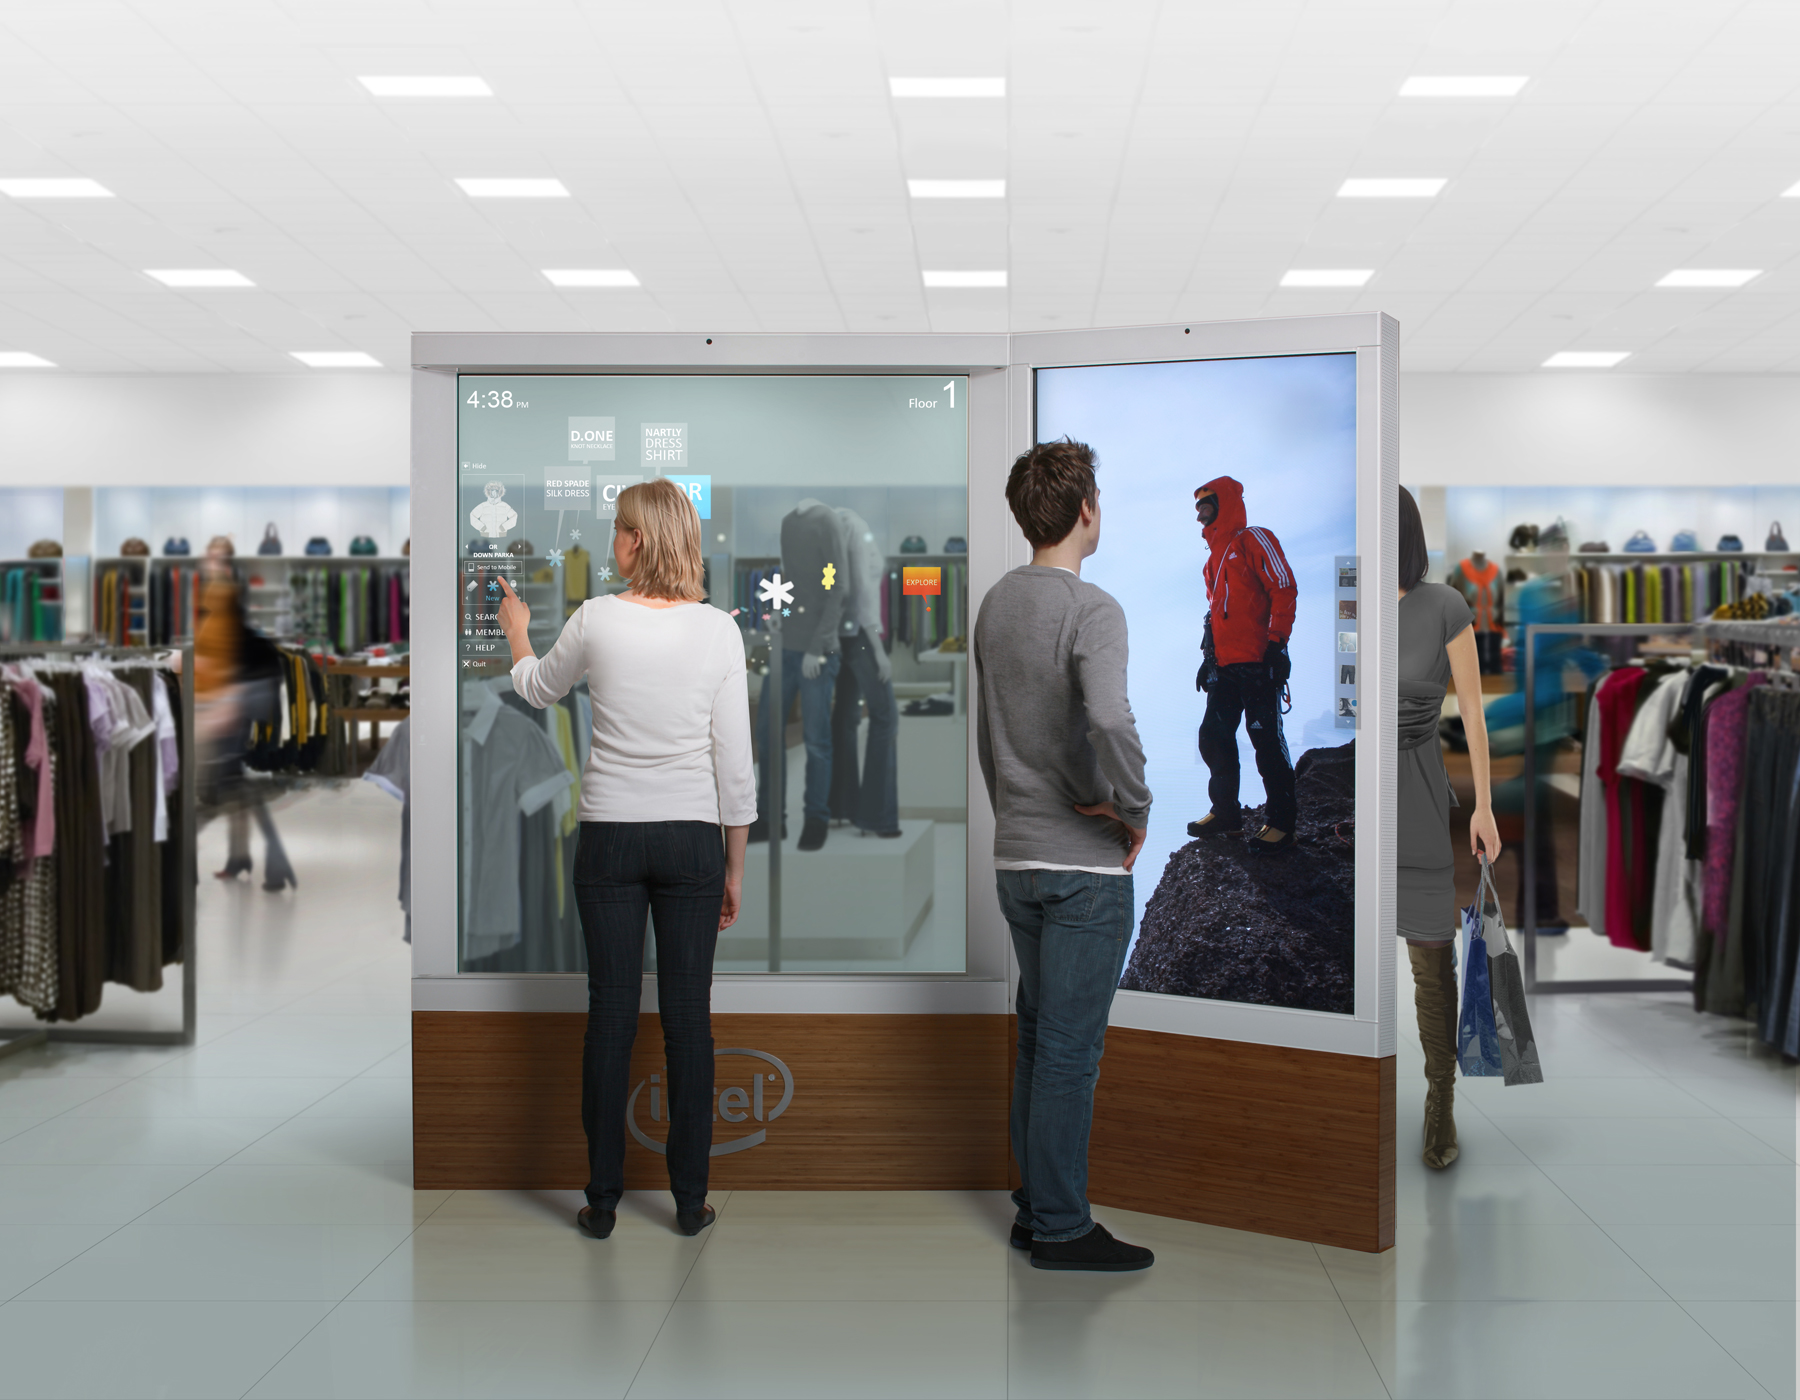 Looking for Digital Signage? Try Out Free Digital Signage